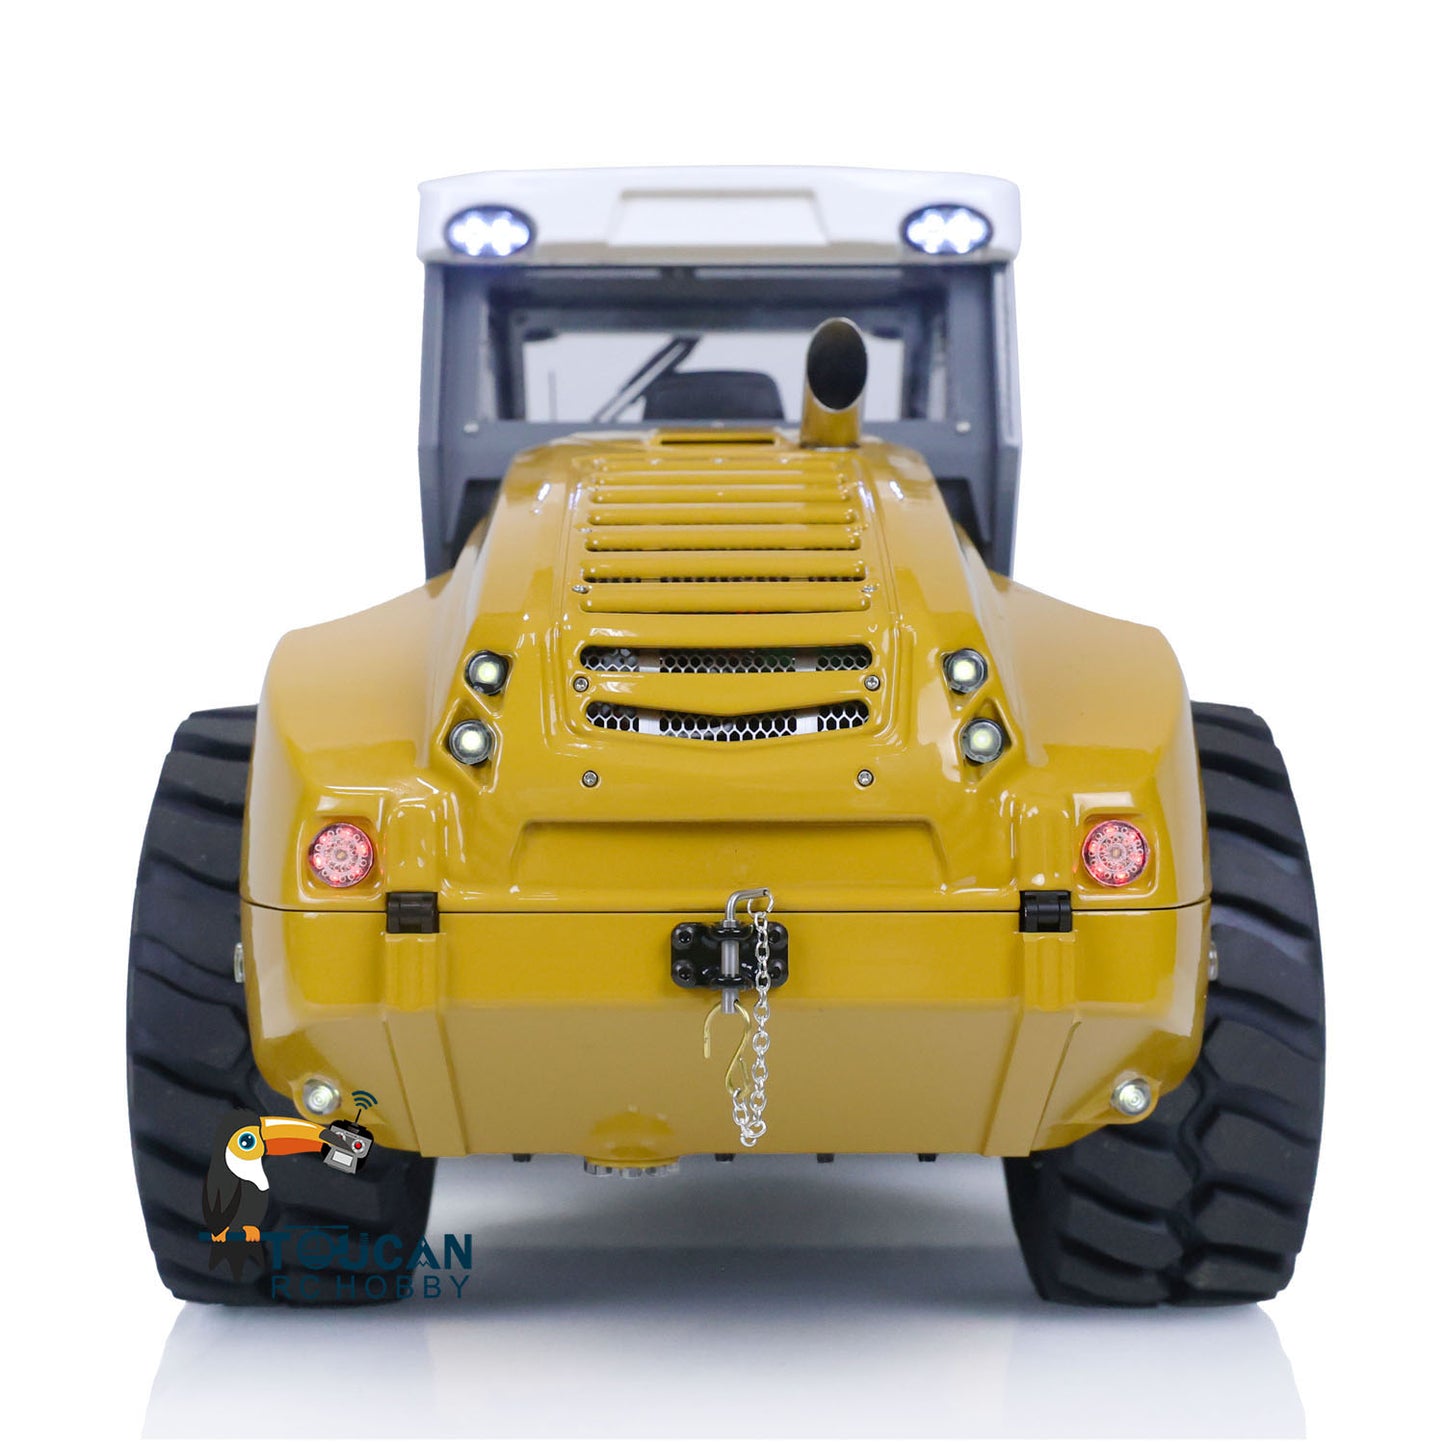 LESU 1/14 RC PNP Painted and Assembled Hydraulic Road Roller Model Motor Aoue-H13ixc Motor ESC Light Sound I6S Controller